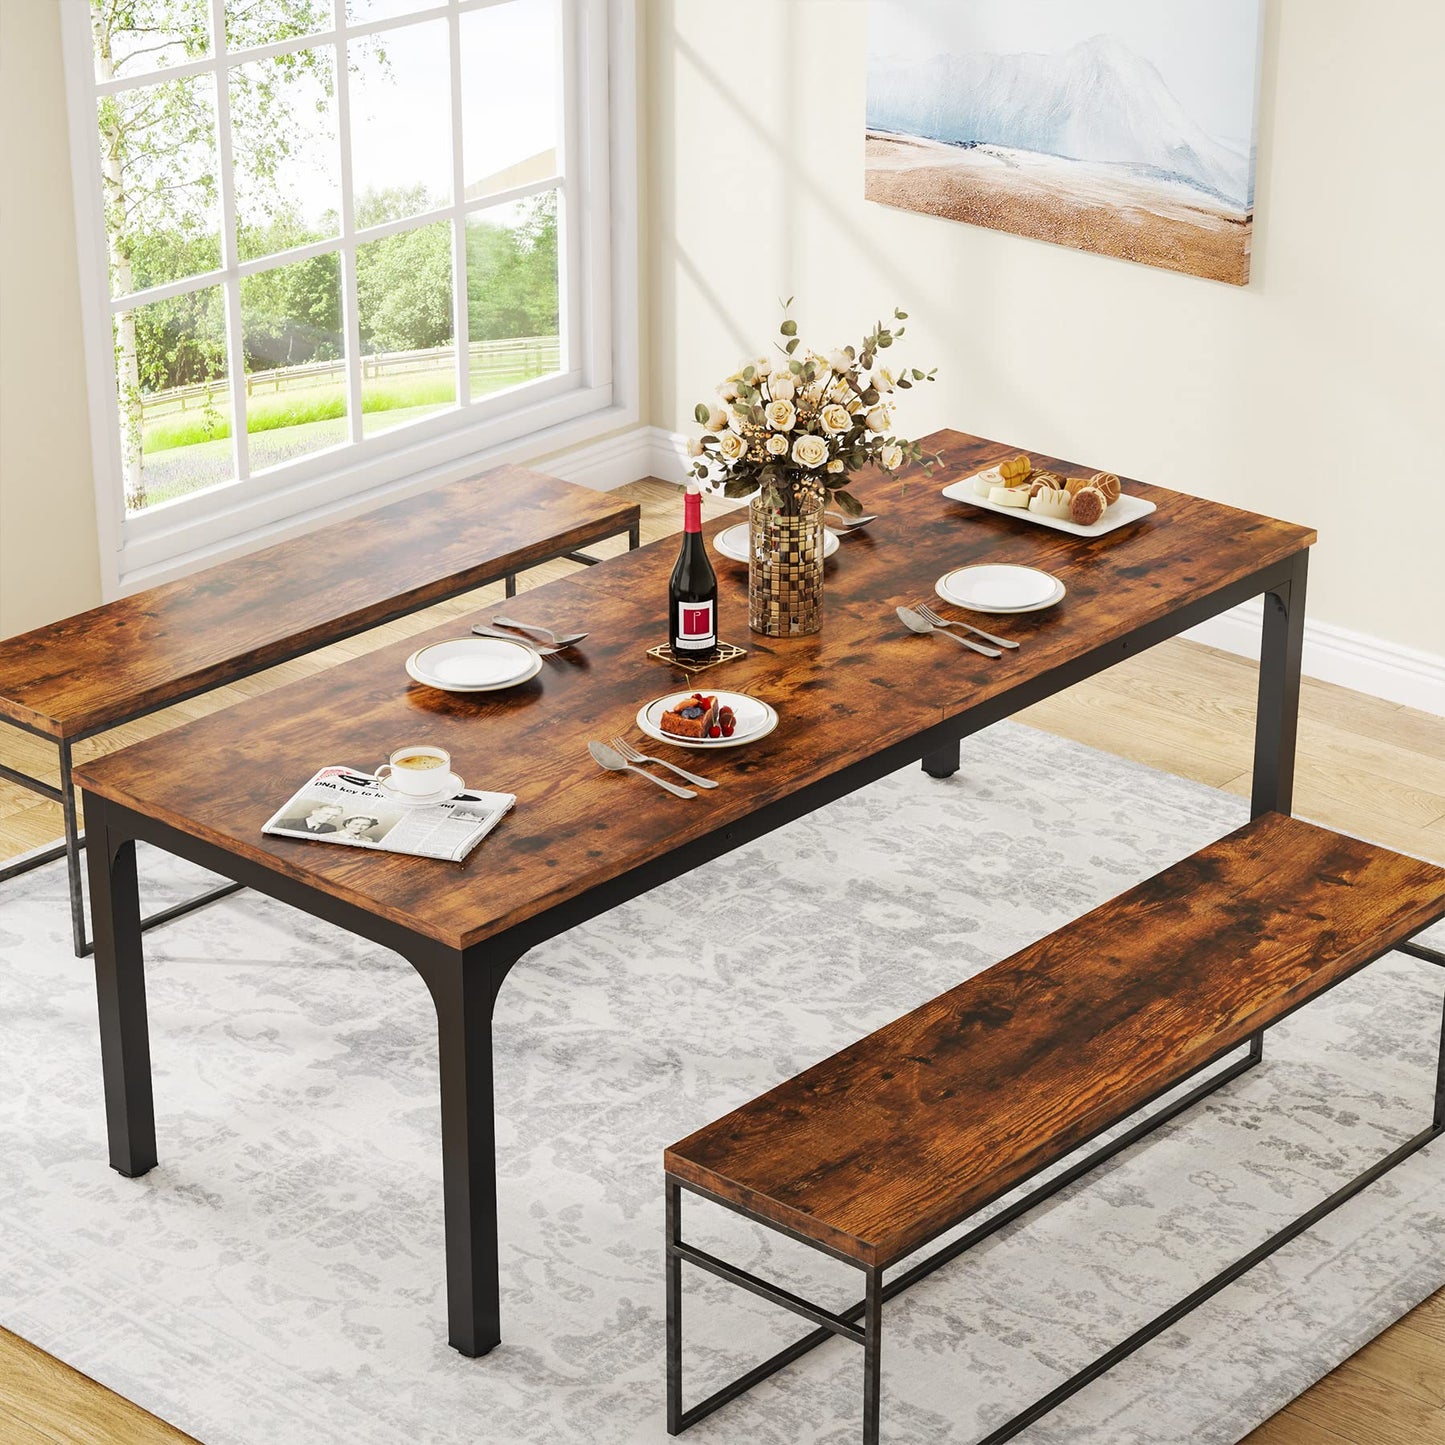 Tribesigns Dining Table for 6-8 Person, 78 inch Long Rectangular Kitchen Dining Table for Living Room and Dining Room, 78.7 x 27.5 x 29.5 Inches(Only